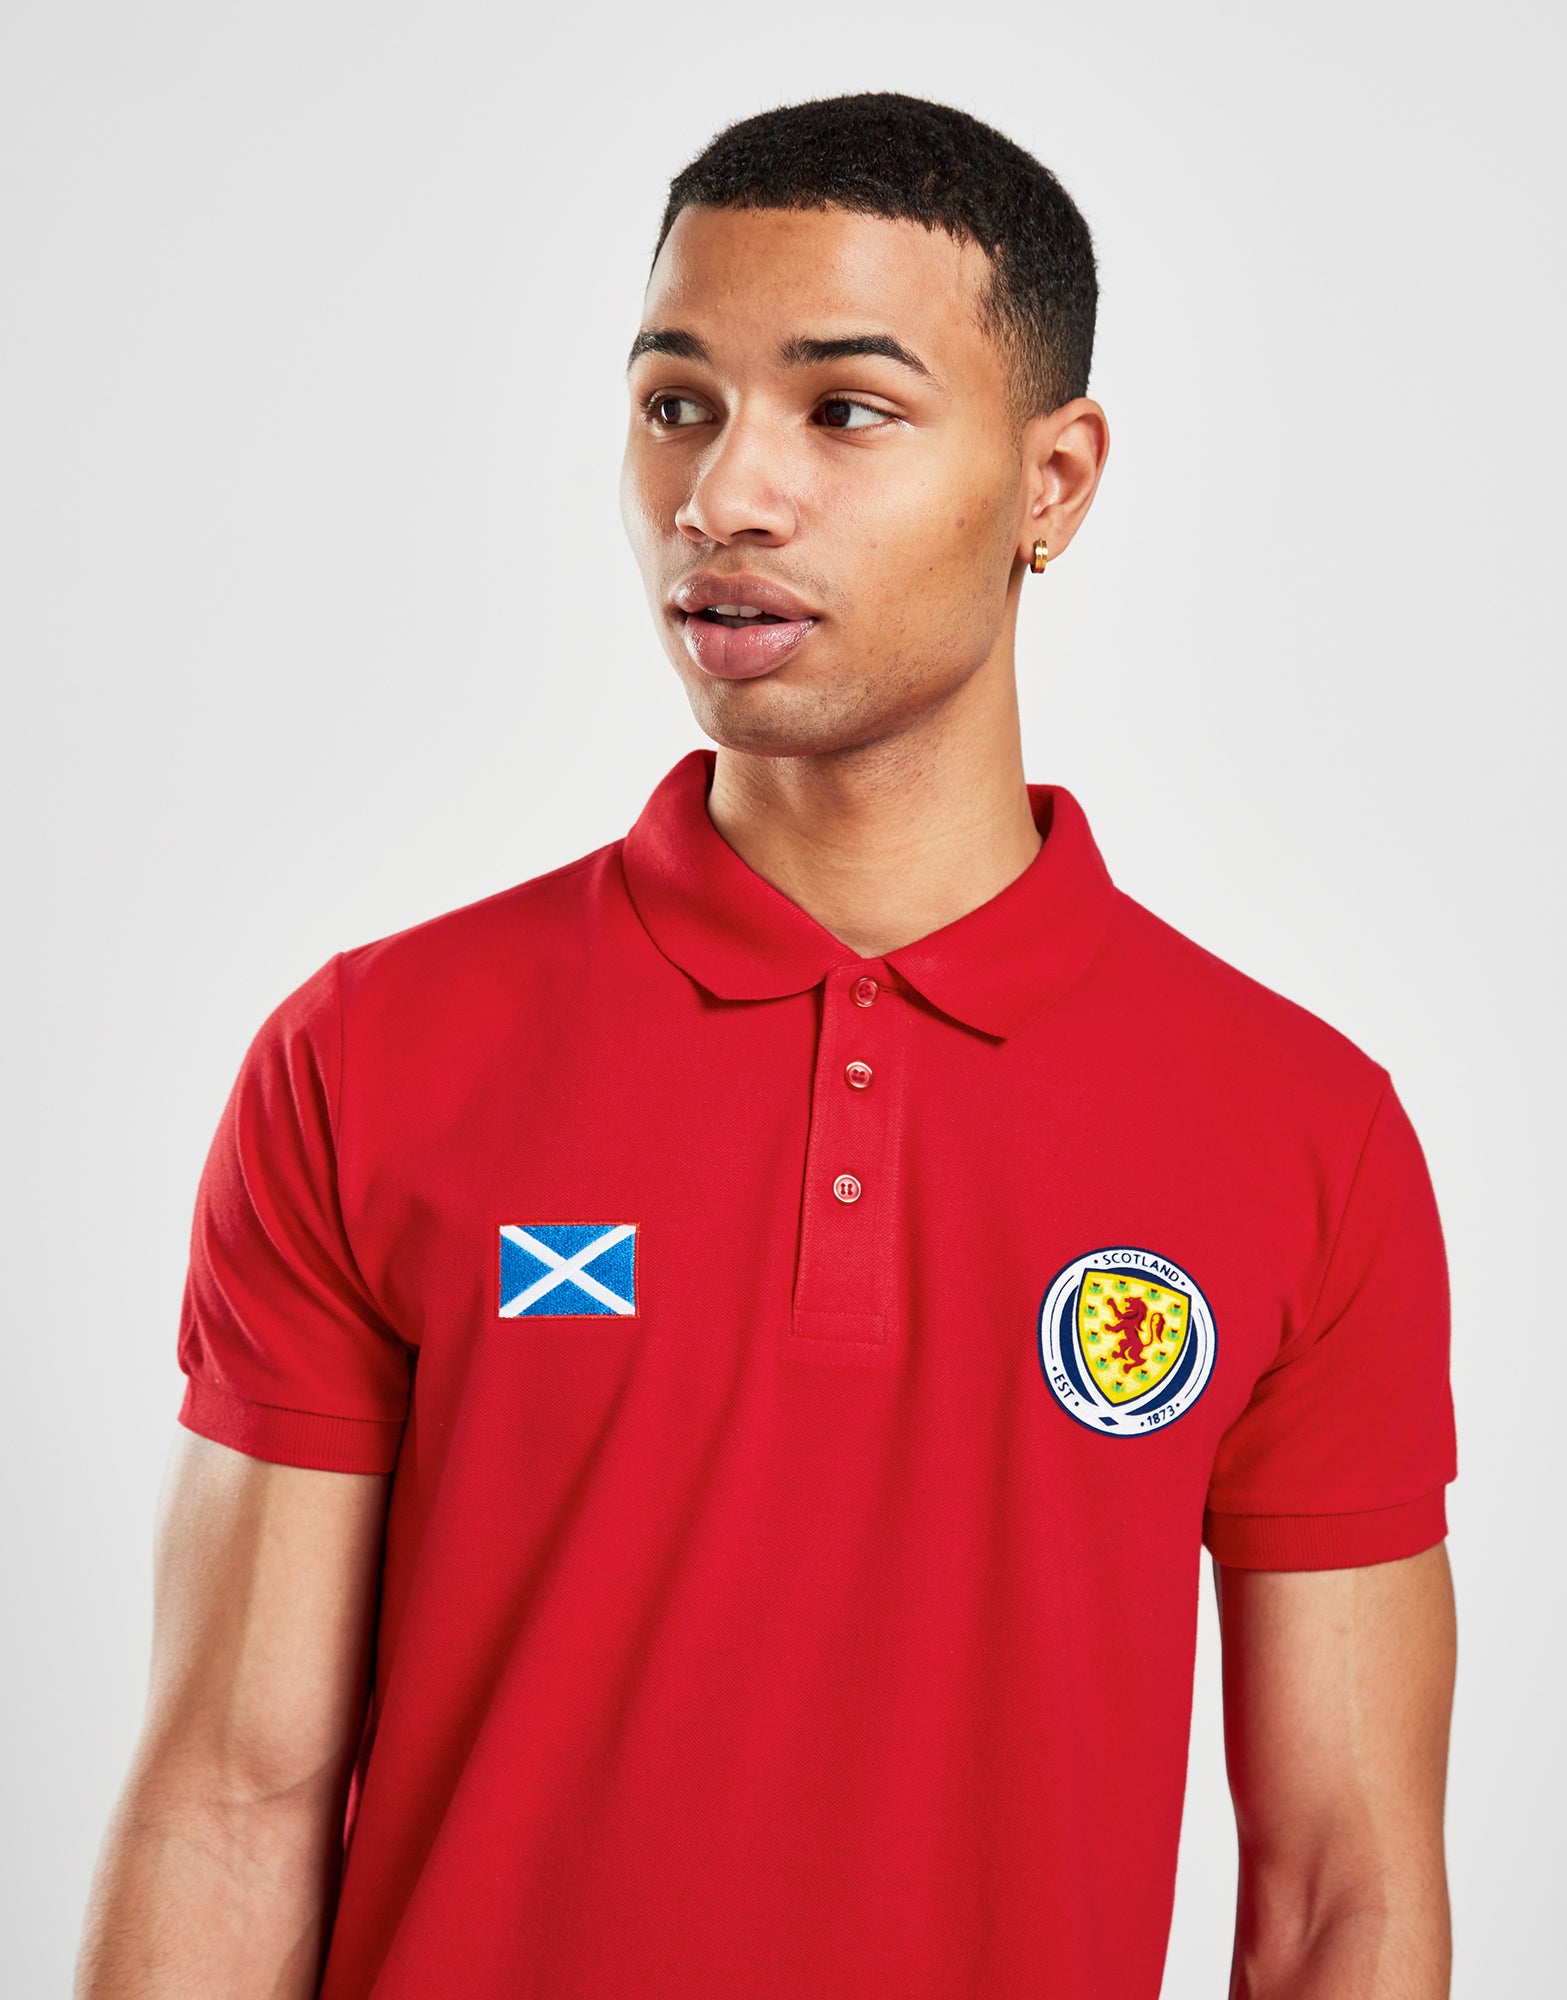 Official Team Scotland Polo - Red - The World Football Store